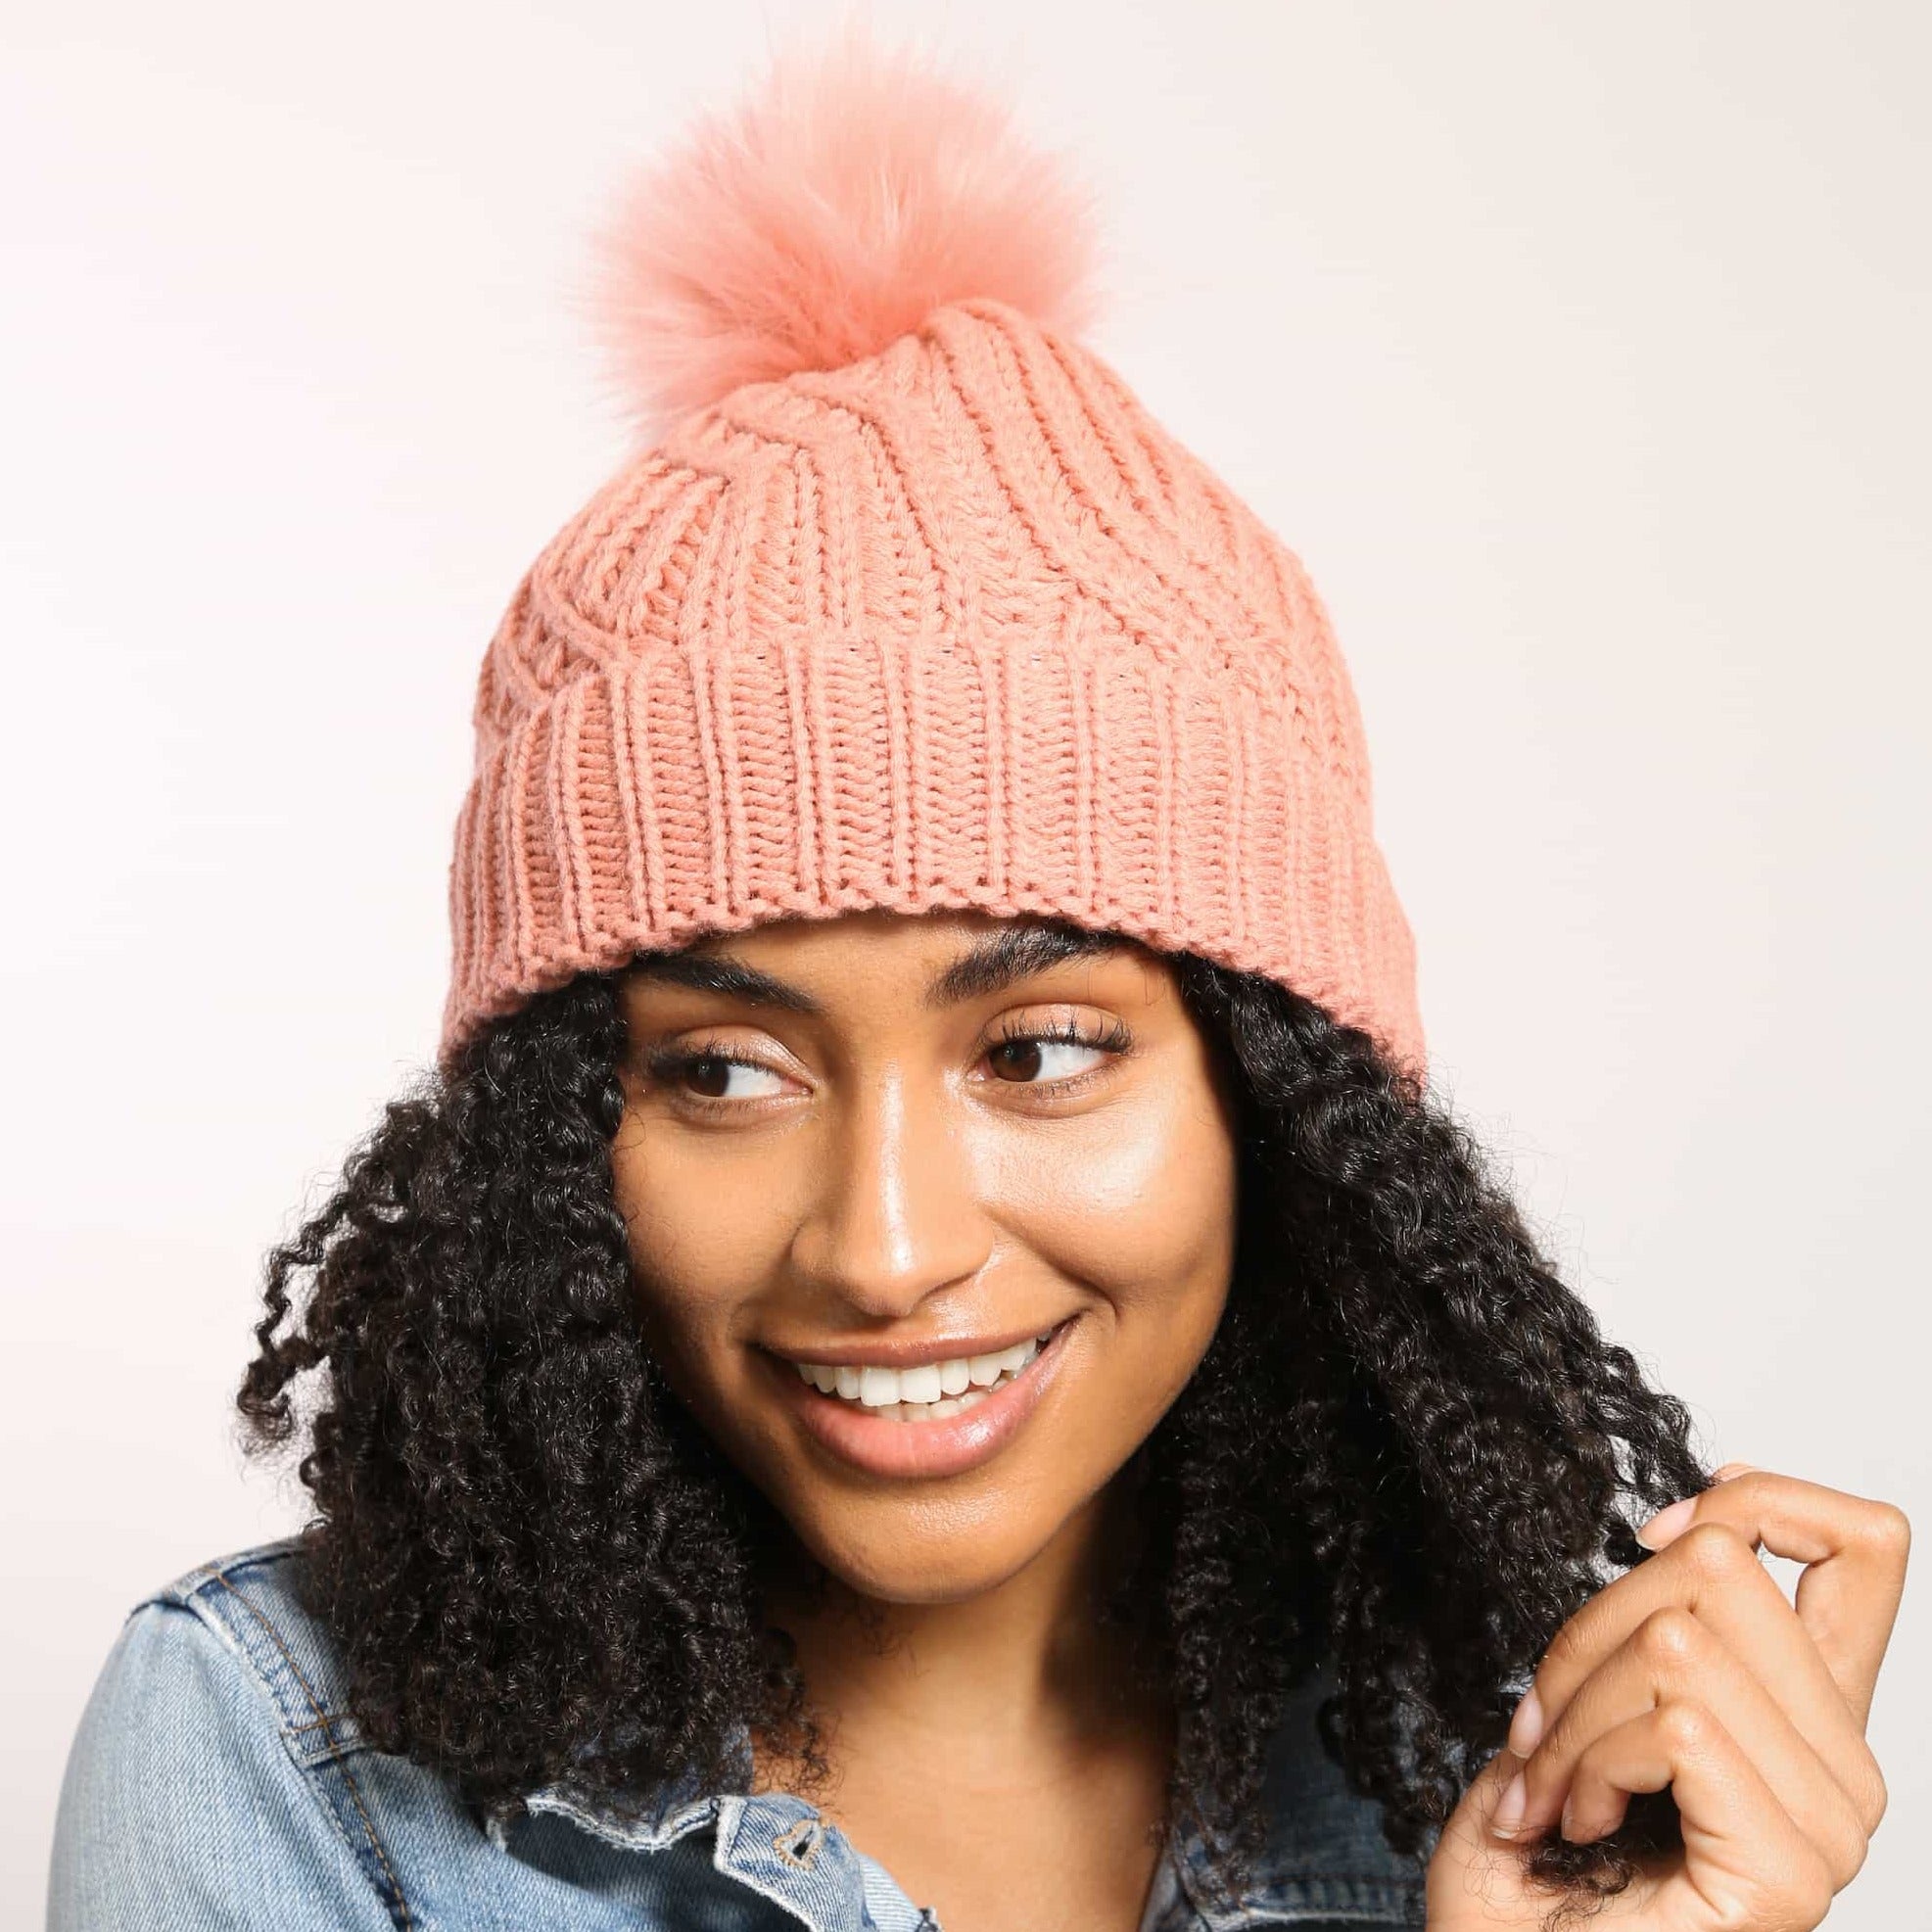 Only Curls Satin Lined Knitted Beanie Hat - Dusty Coral with Pom Pom - Only Curls